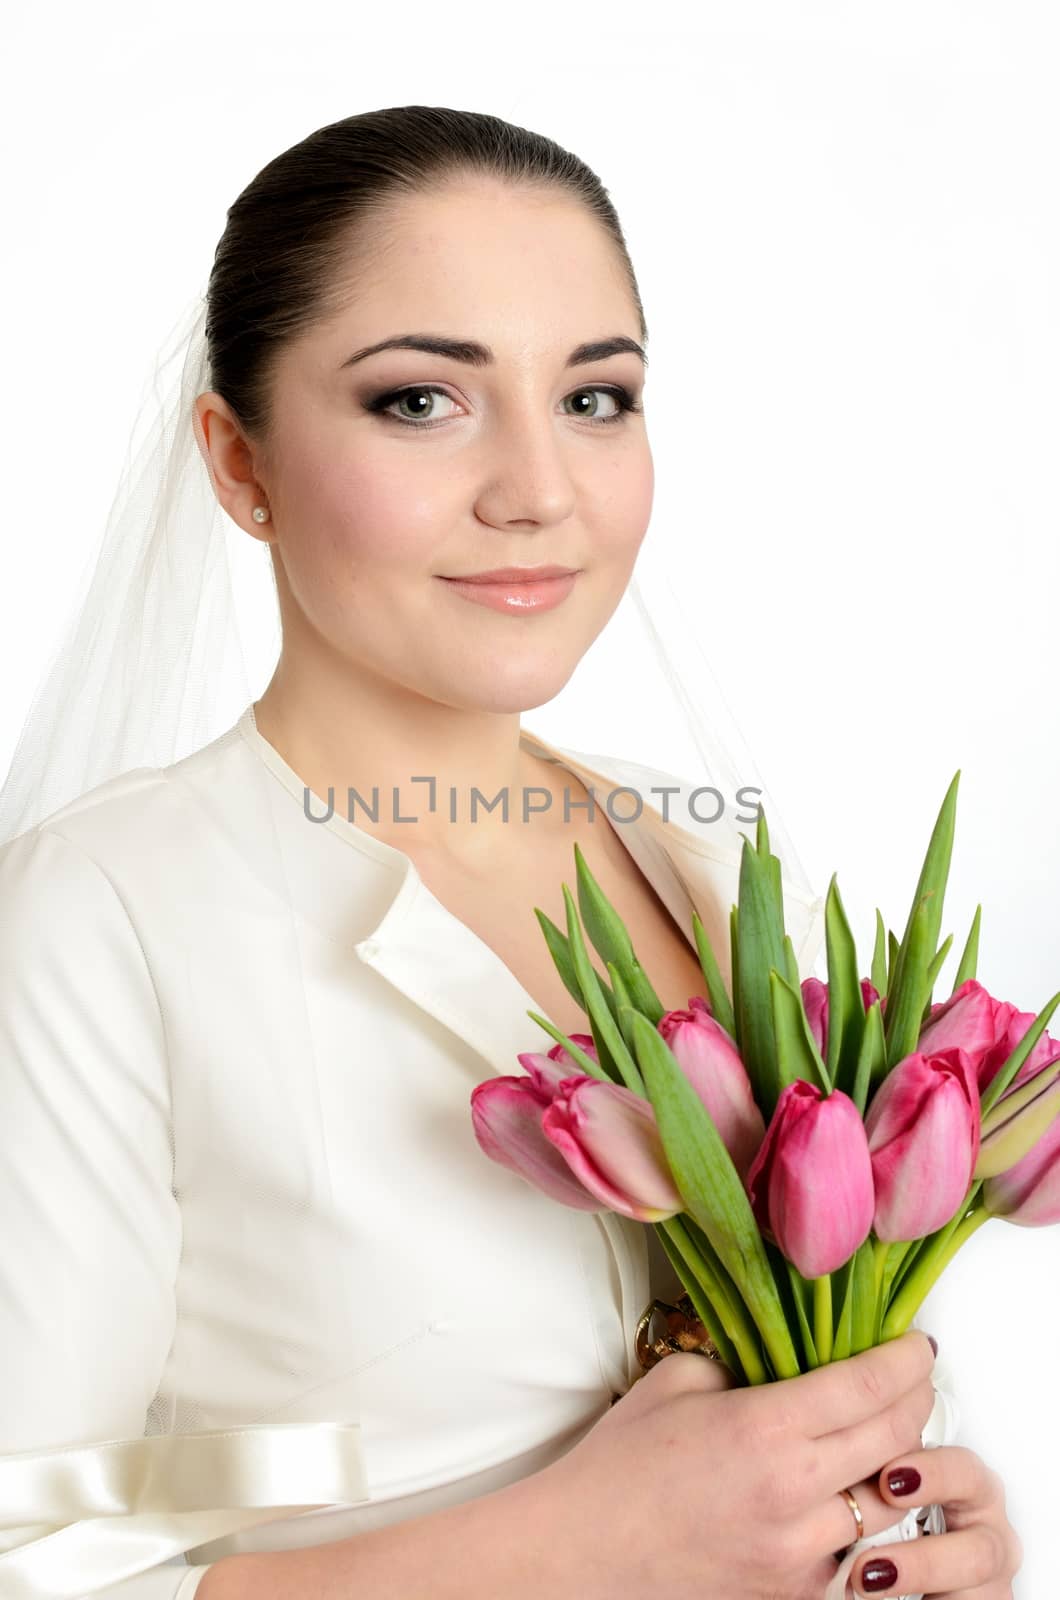 Happy bride with veil and tulips by bartekchiny